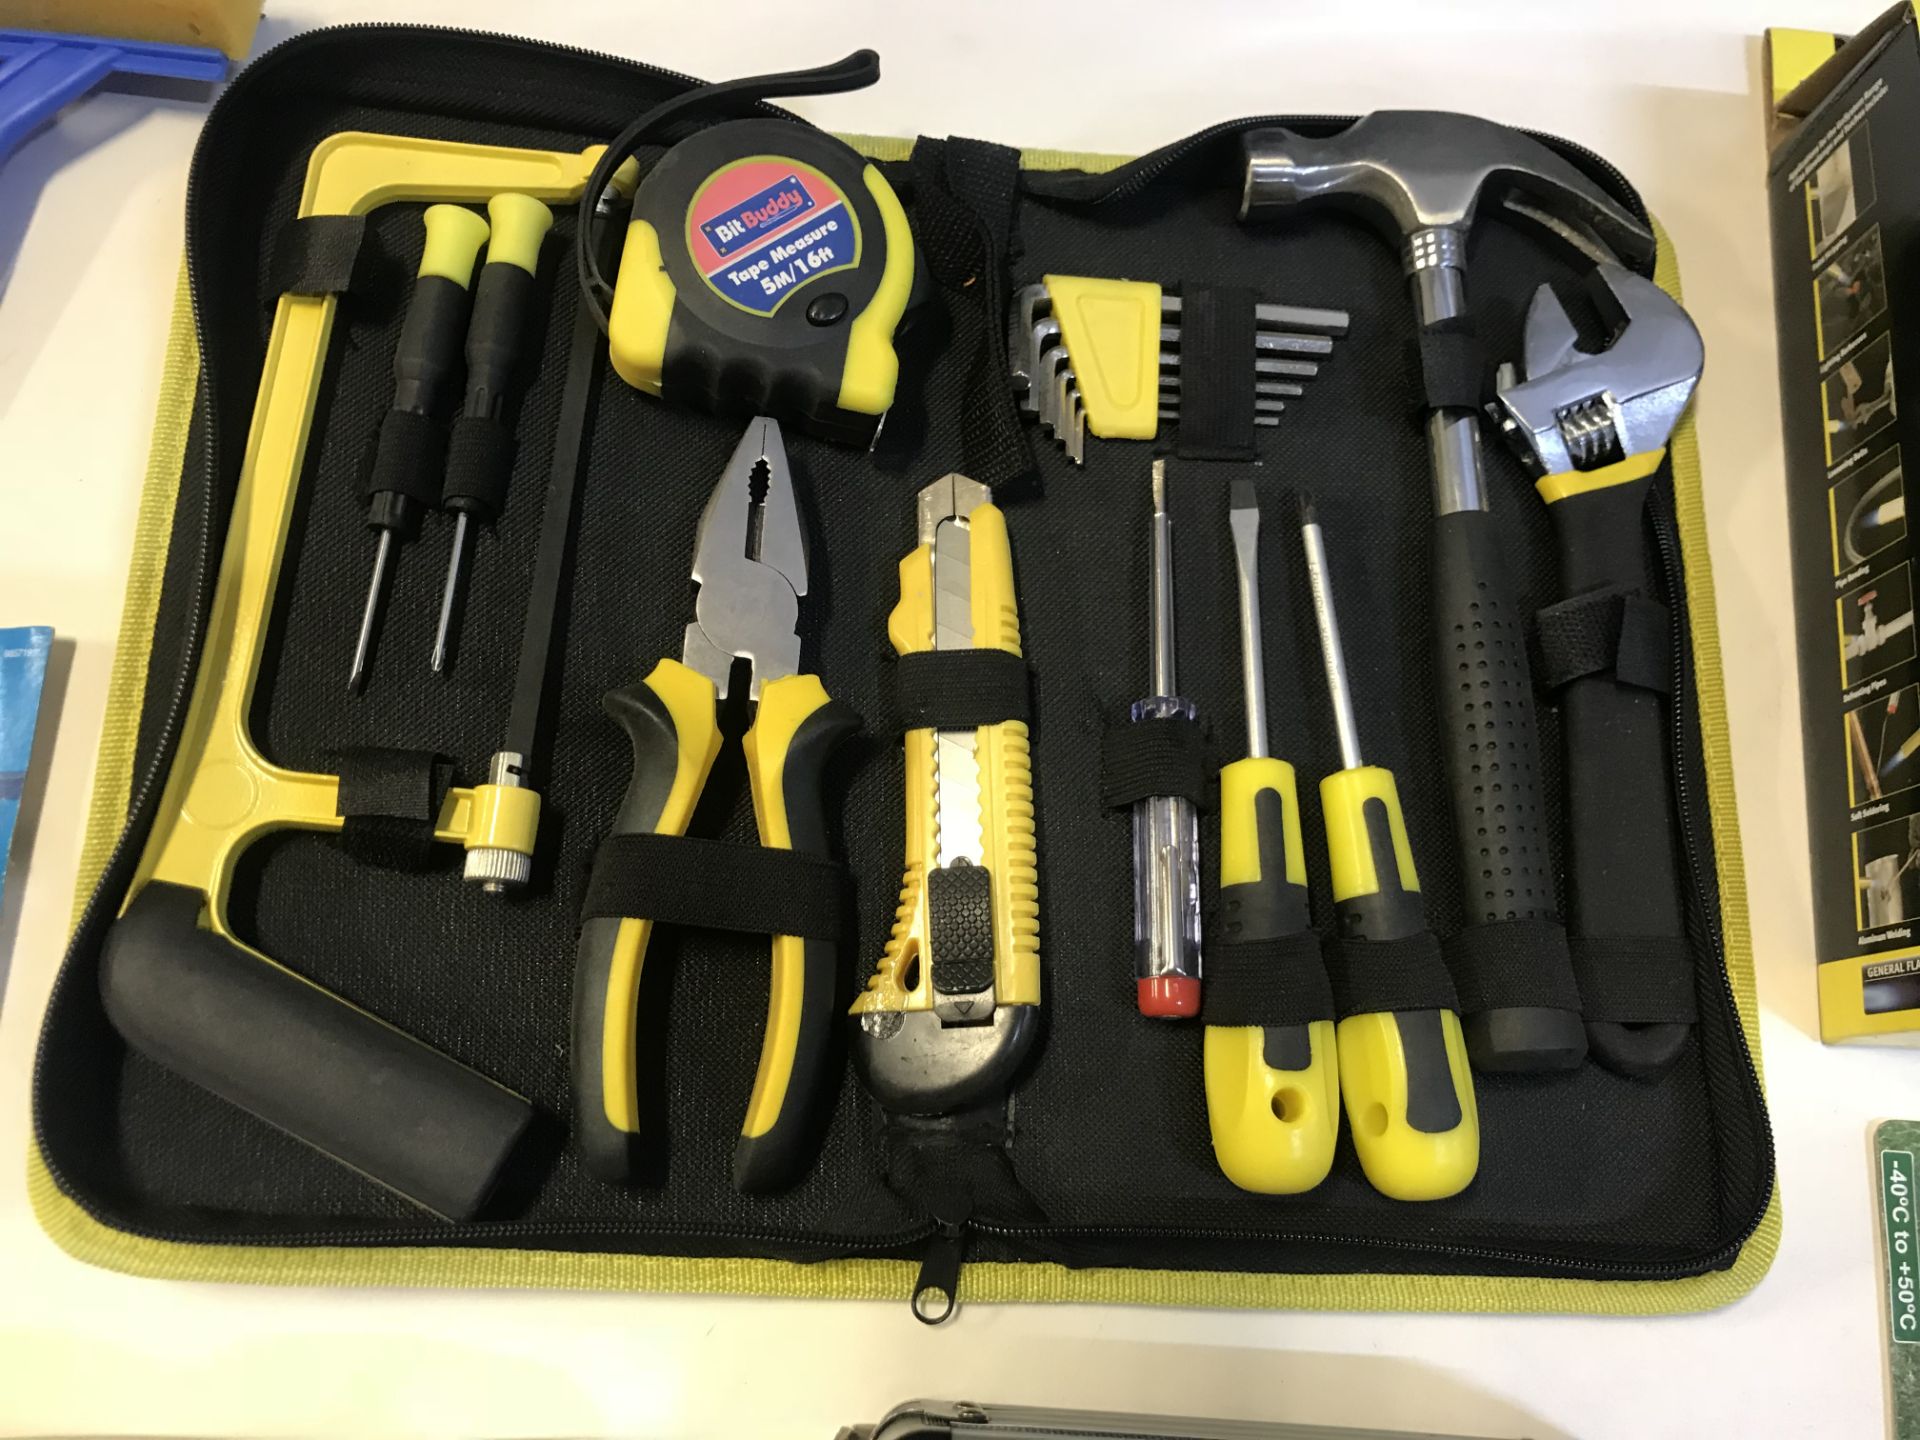 Mixed lot consisting of Compartment Organisers, Screwdrivers, Folding Shovels, Tool Sets etc - Image 8 of 11